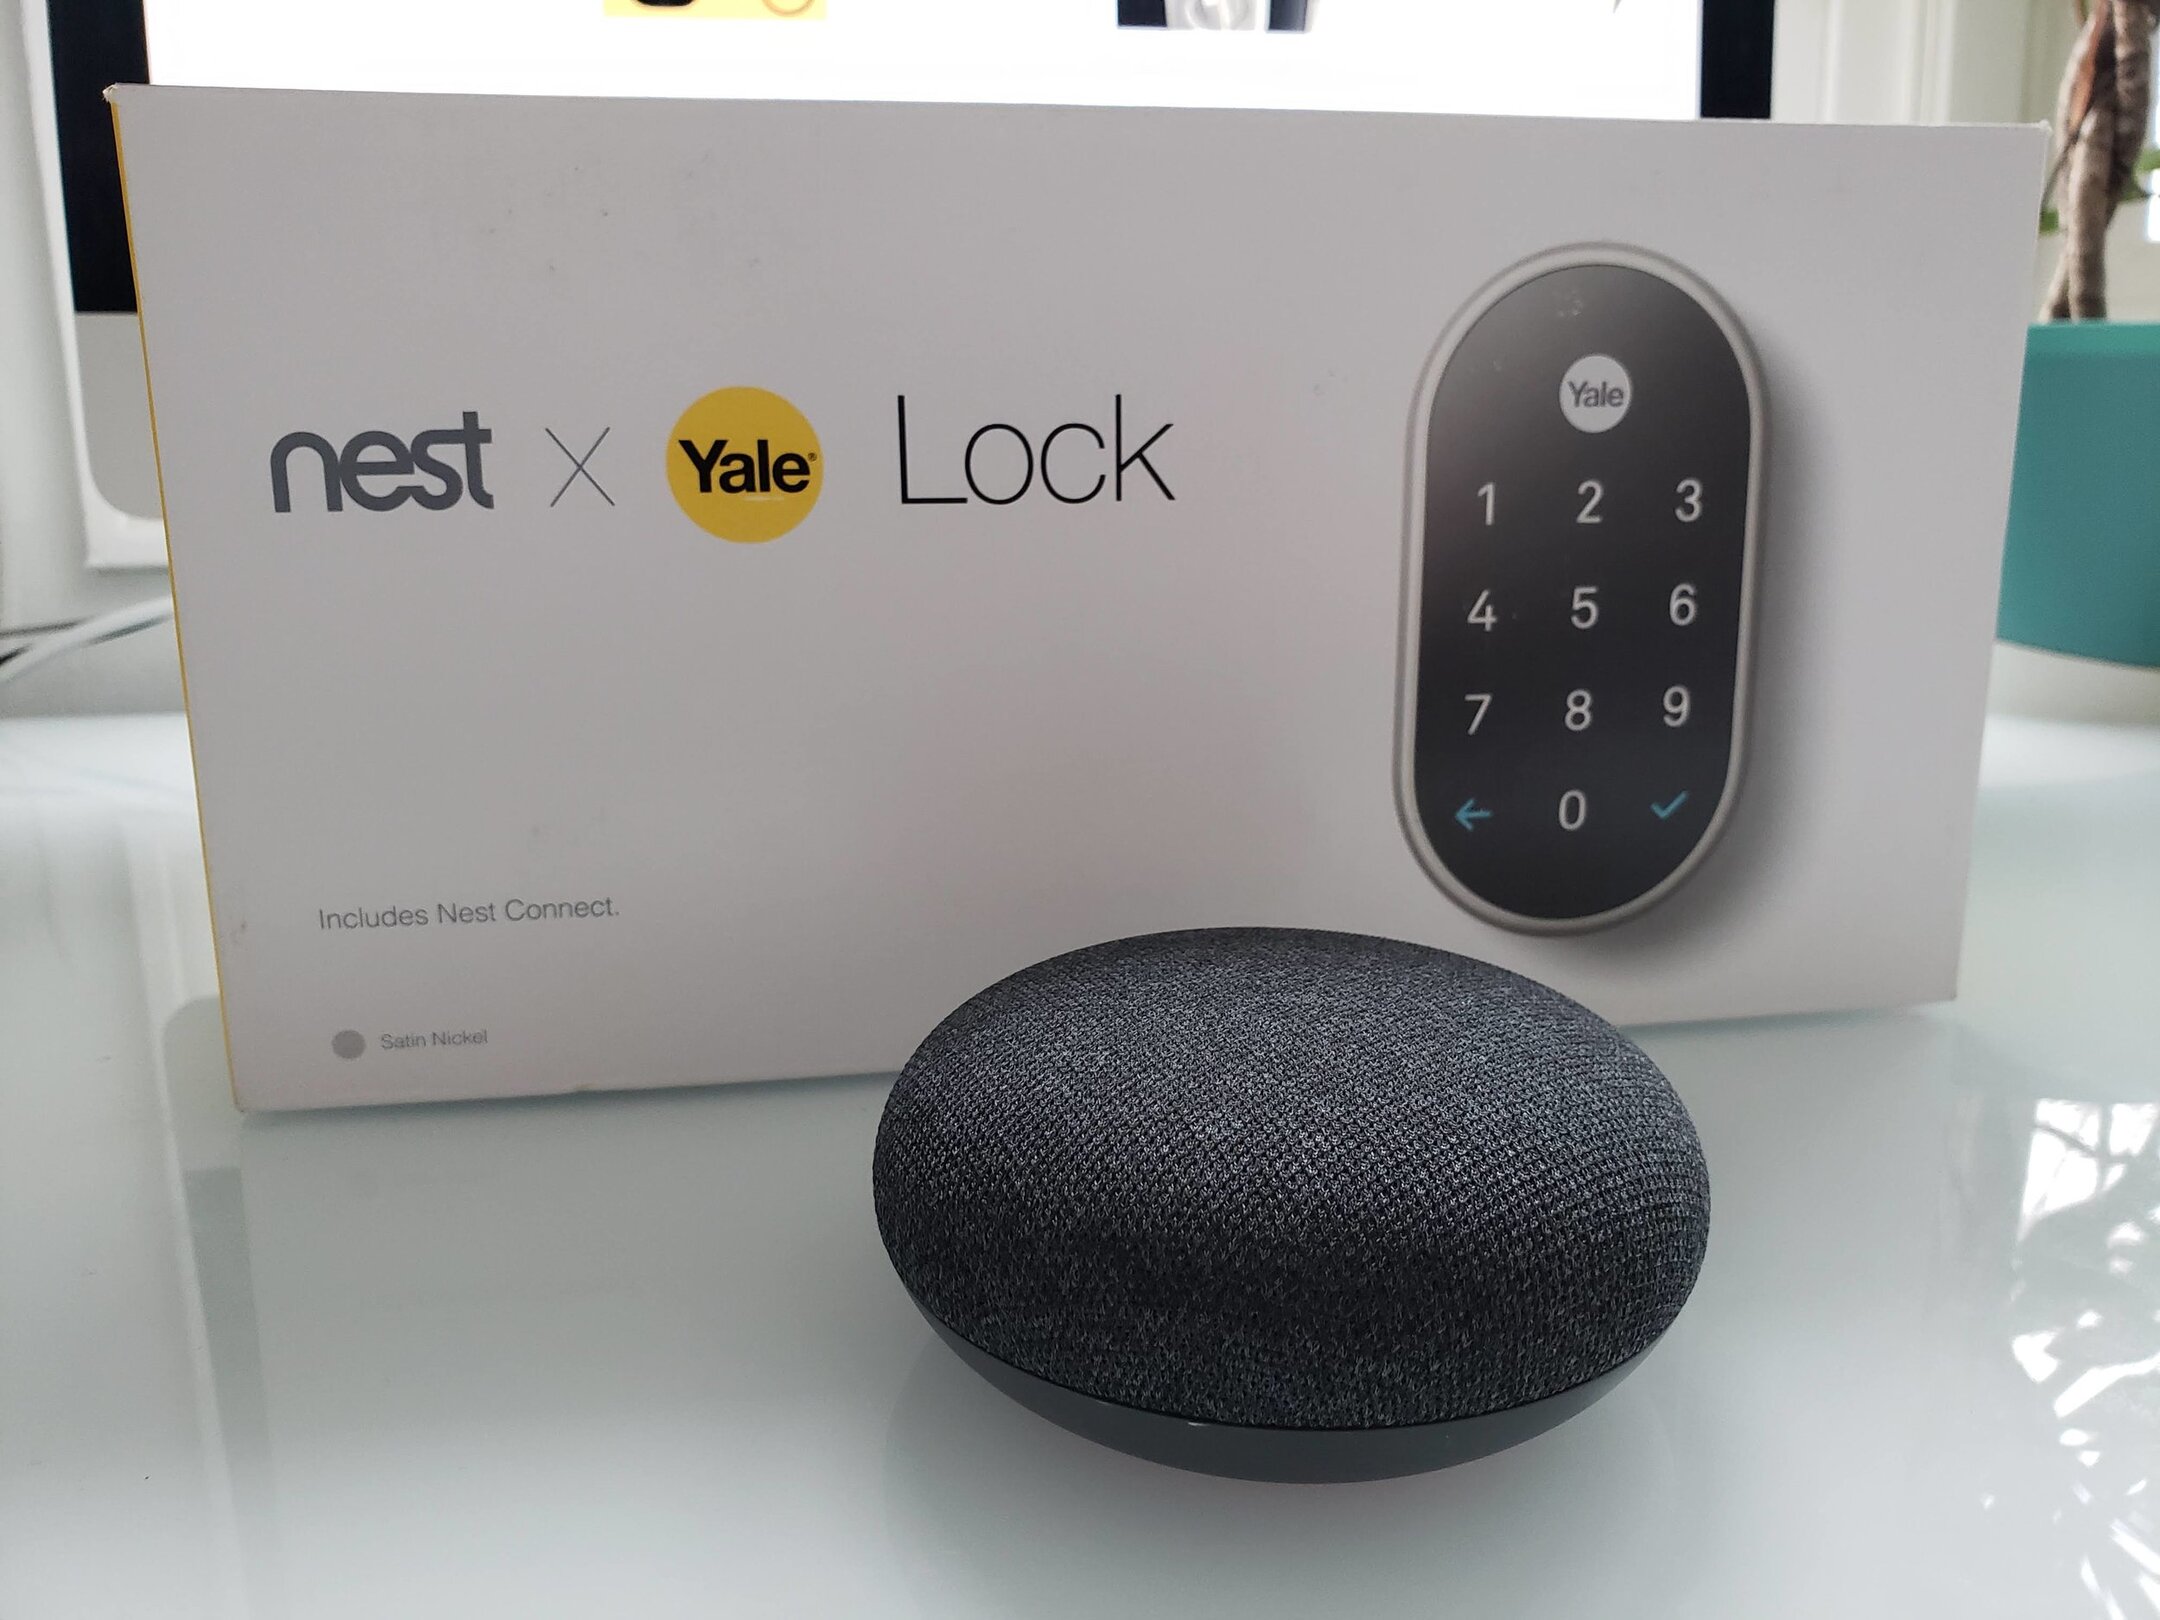 How To Add Nest Yale Lock To Google Home